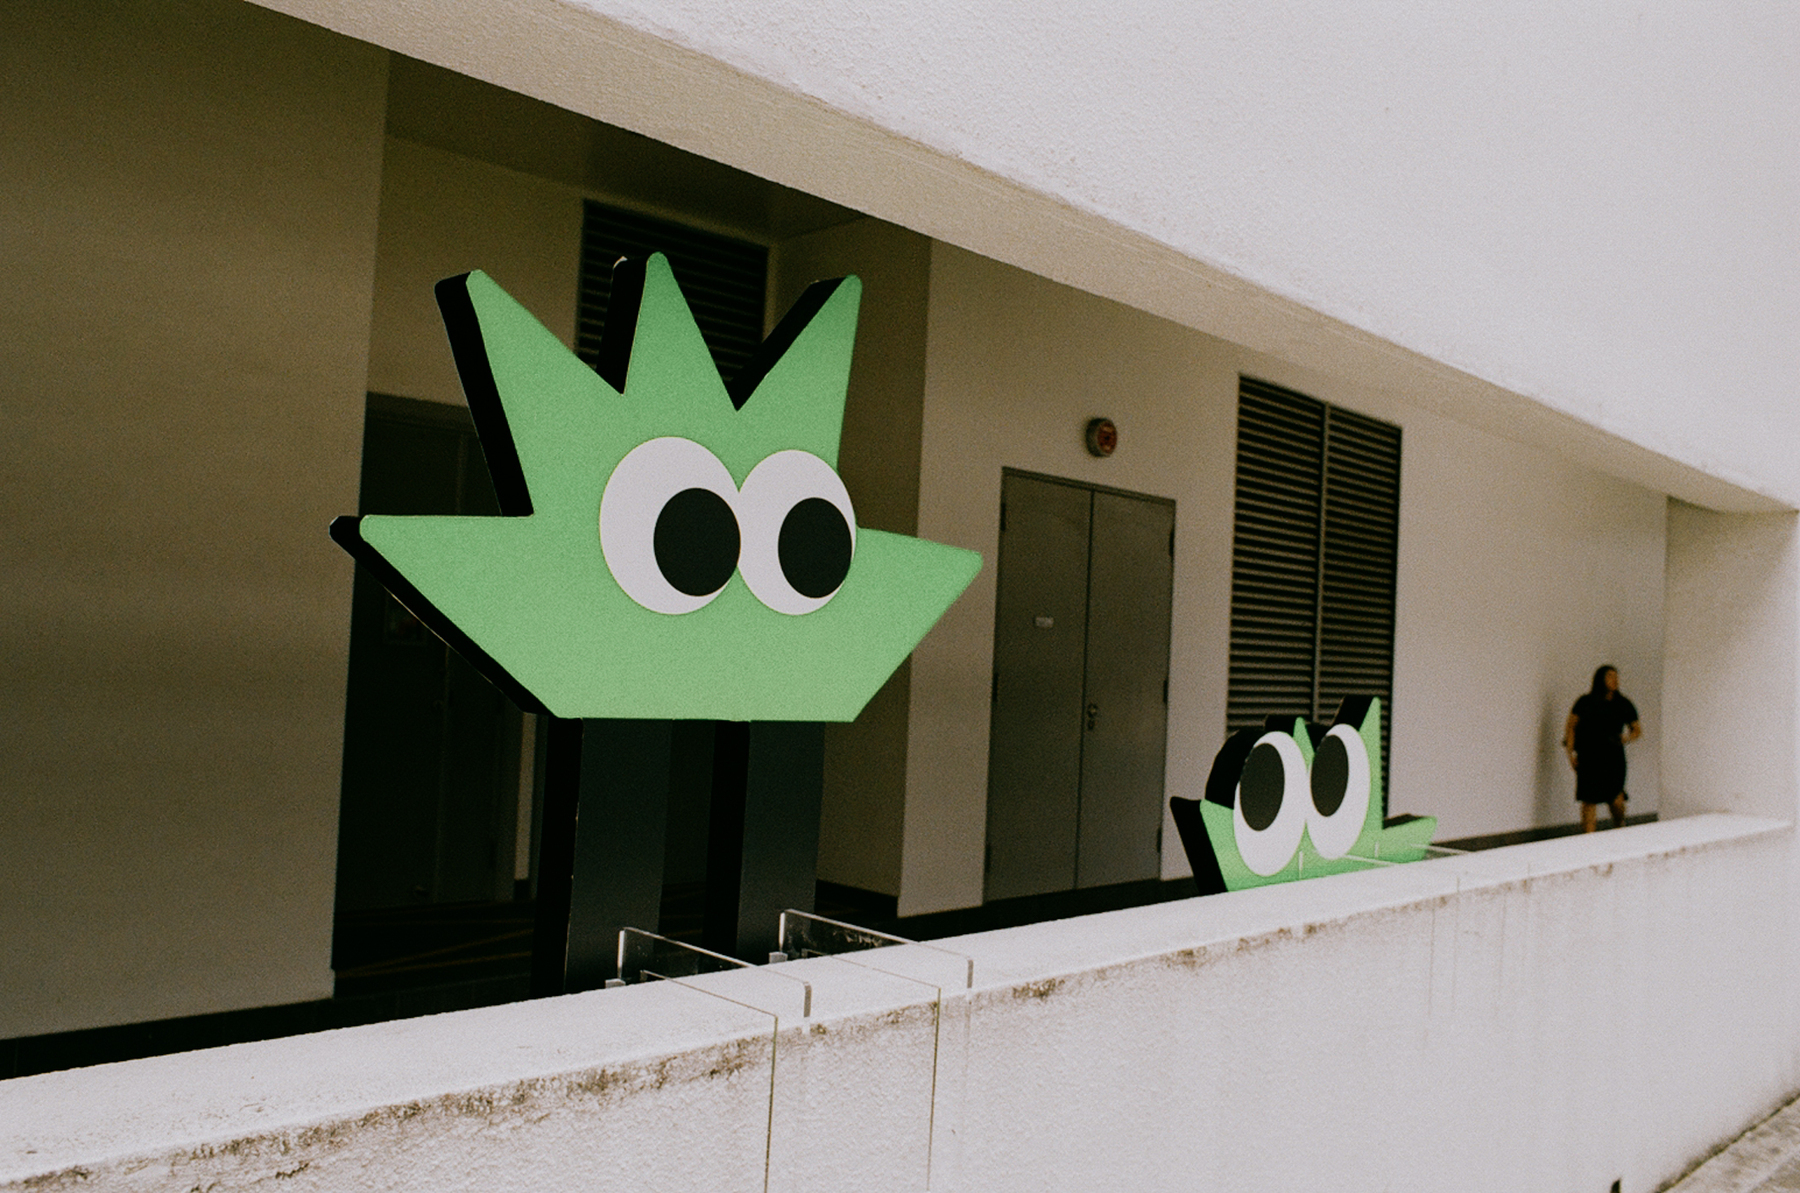 a scan of a color photo showing two cartoonish green characters by the side of a long hallway